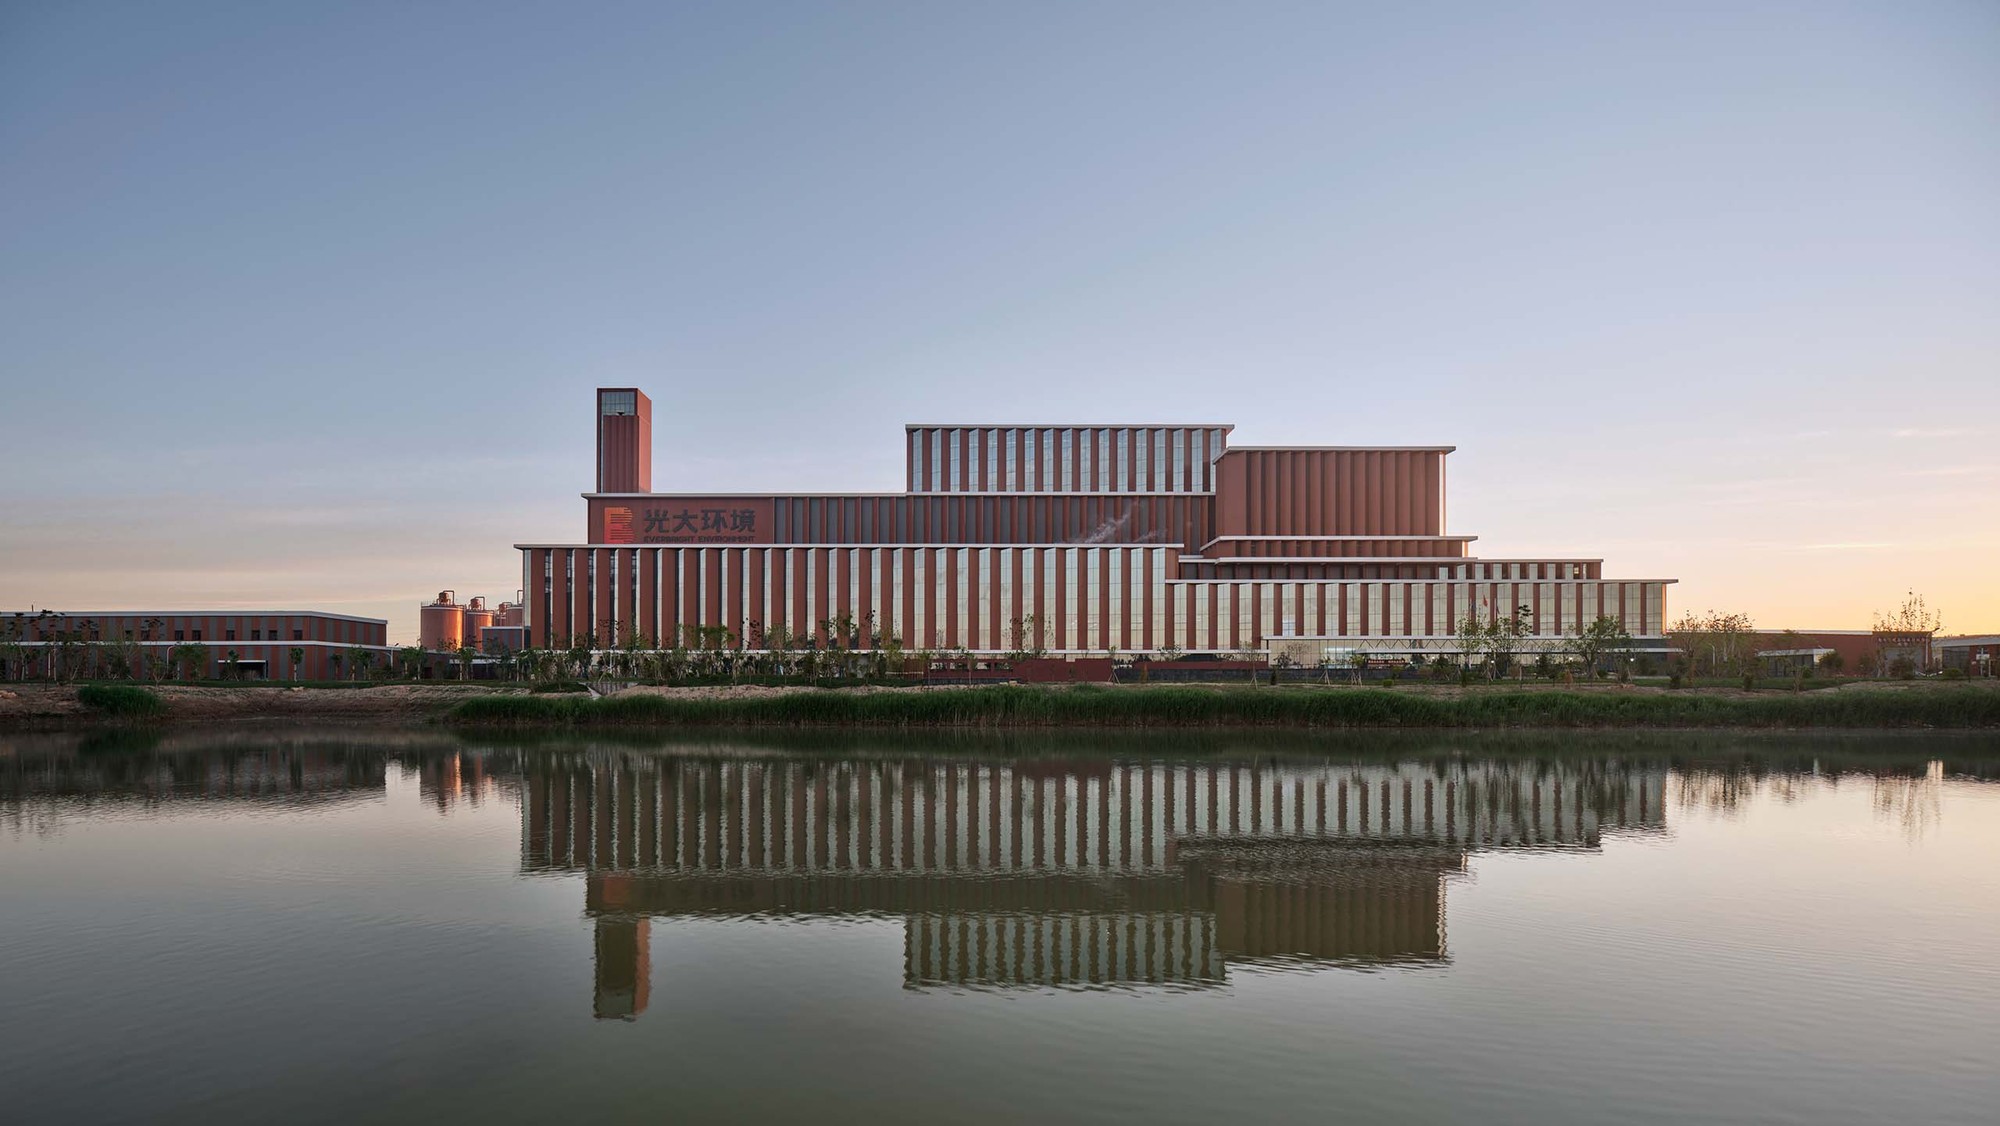 Facade Design of Tianjin Beichen Guangda Waste-to-energy Plant / Atelier NiYang. Photo: ZY Architectural Photography